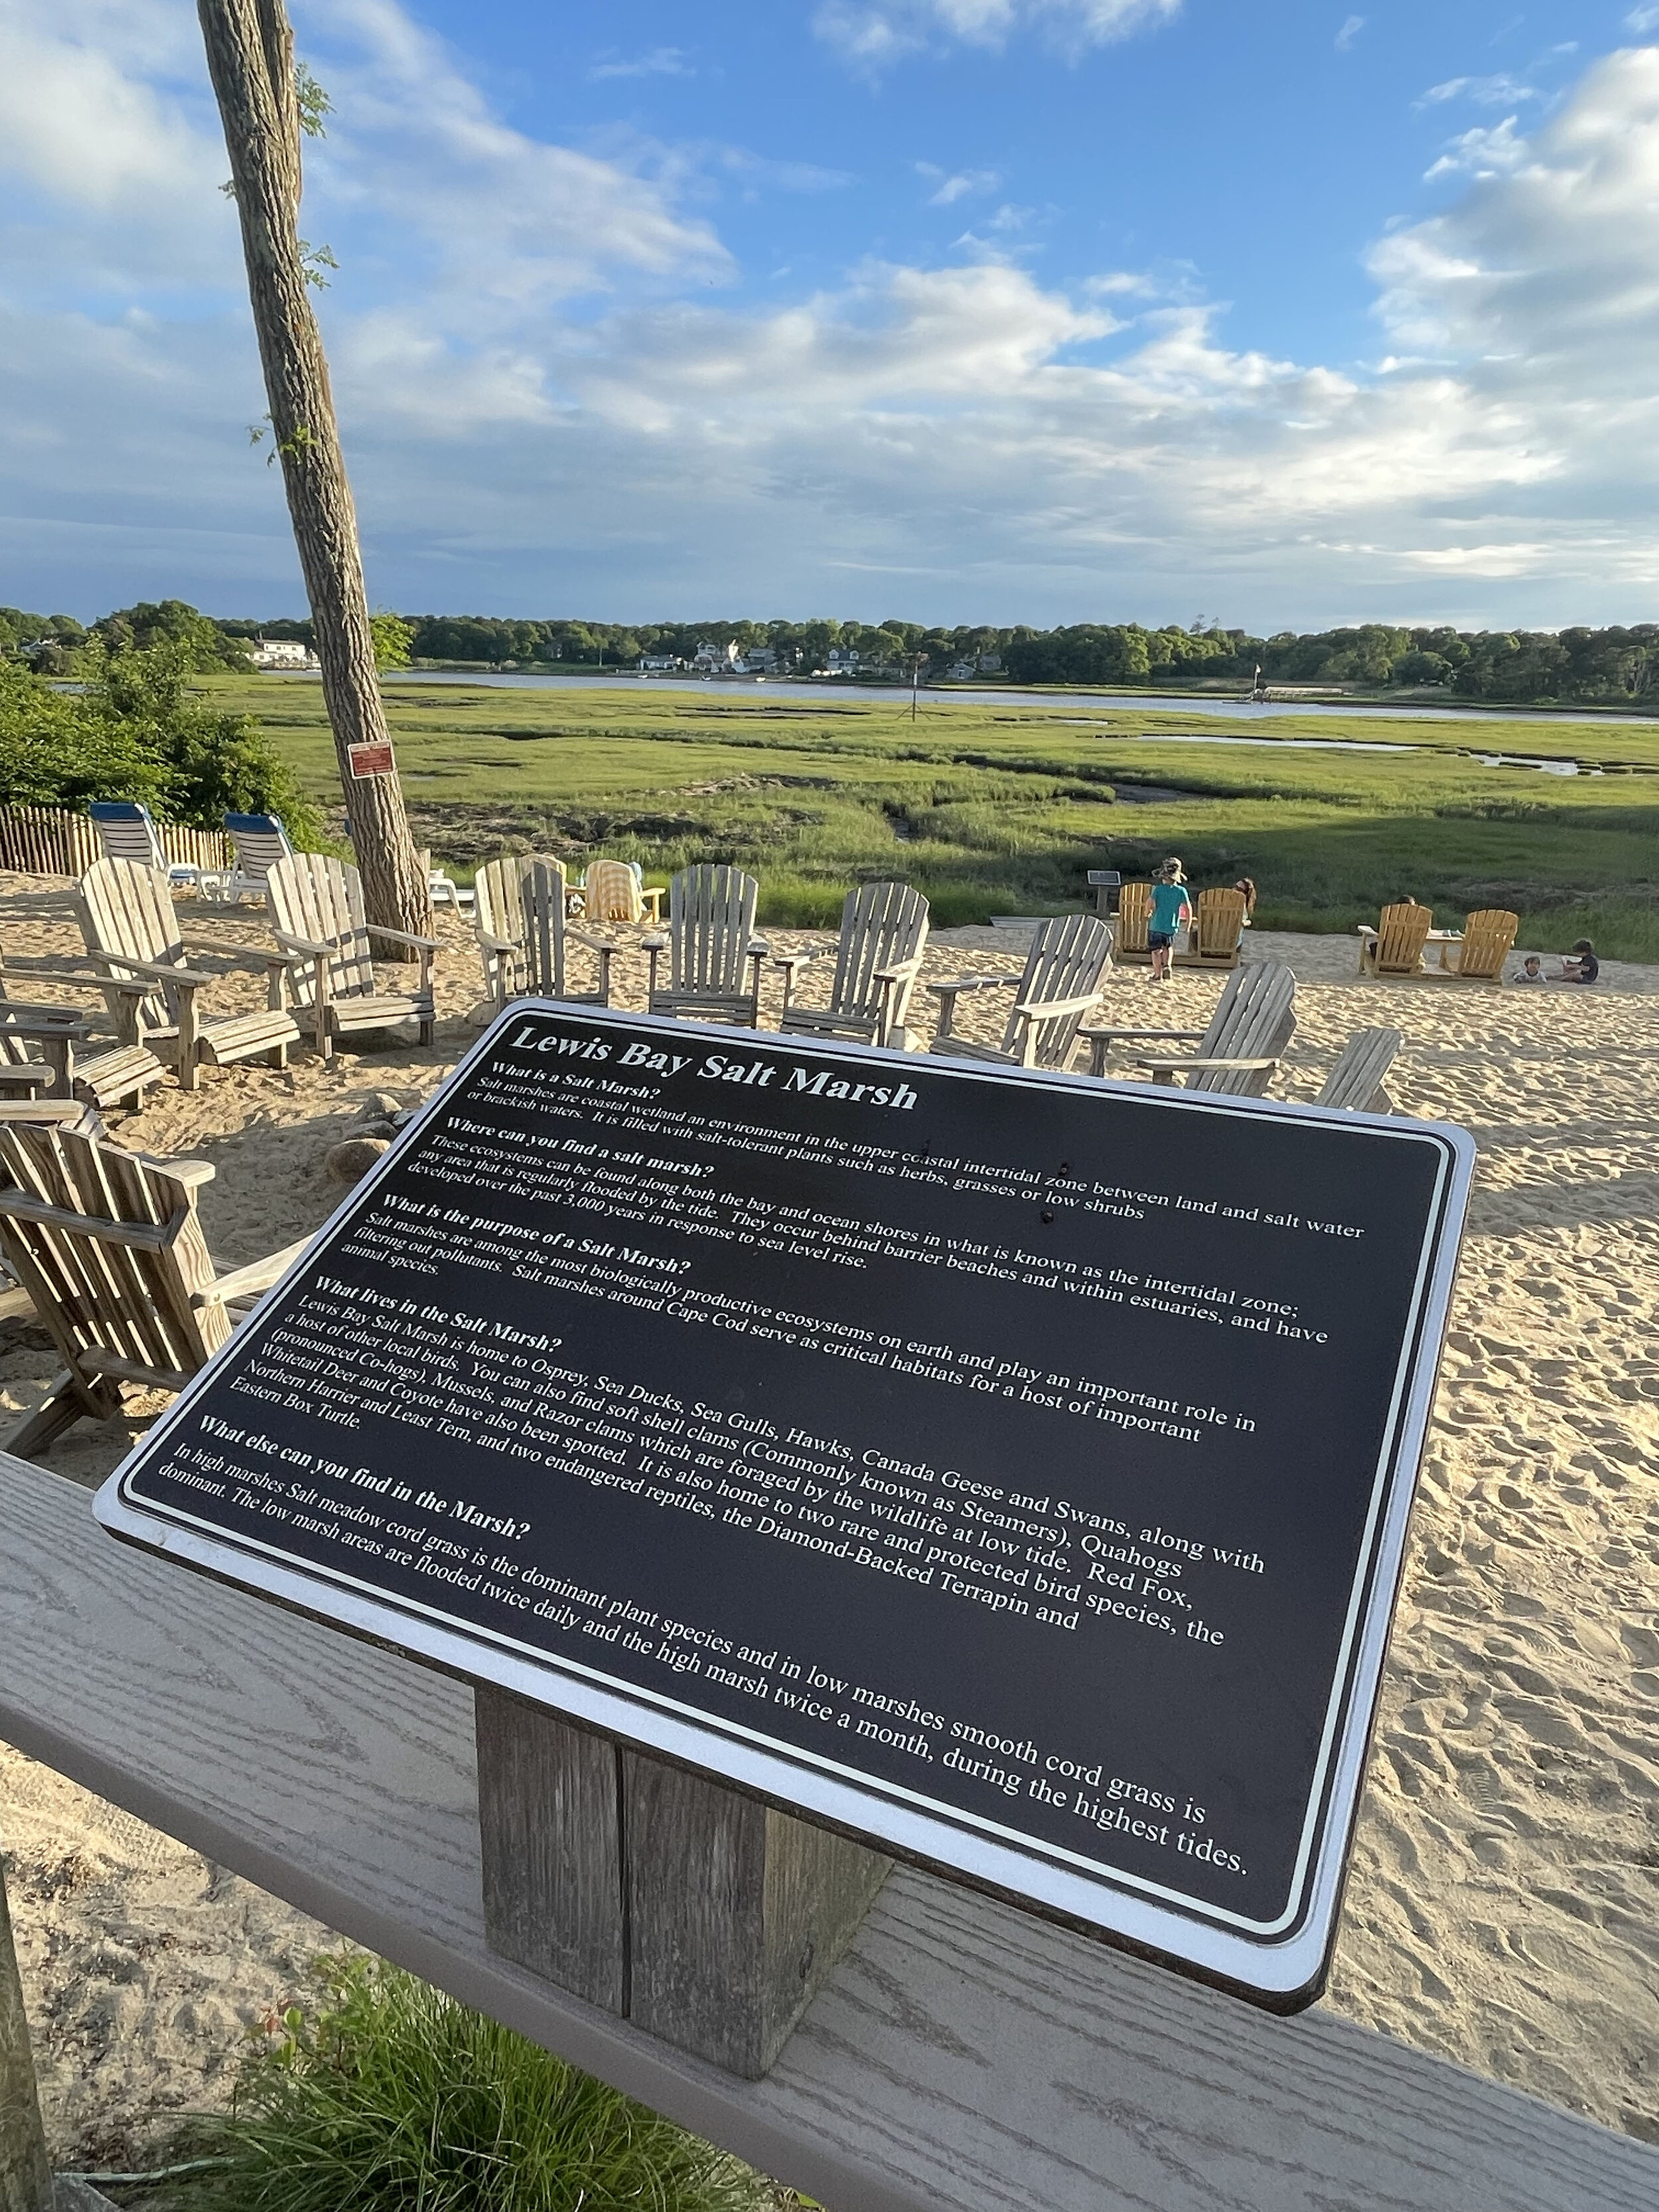 tour at the Bayside Resort Hotel in CAPE COD IN WEST YARMOUTH